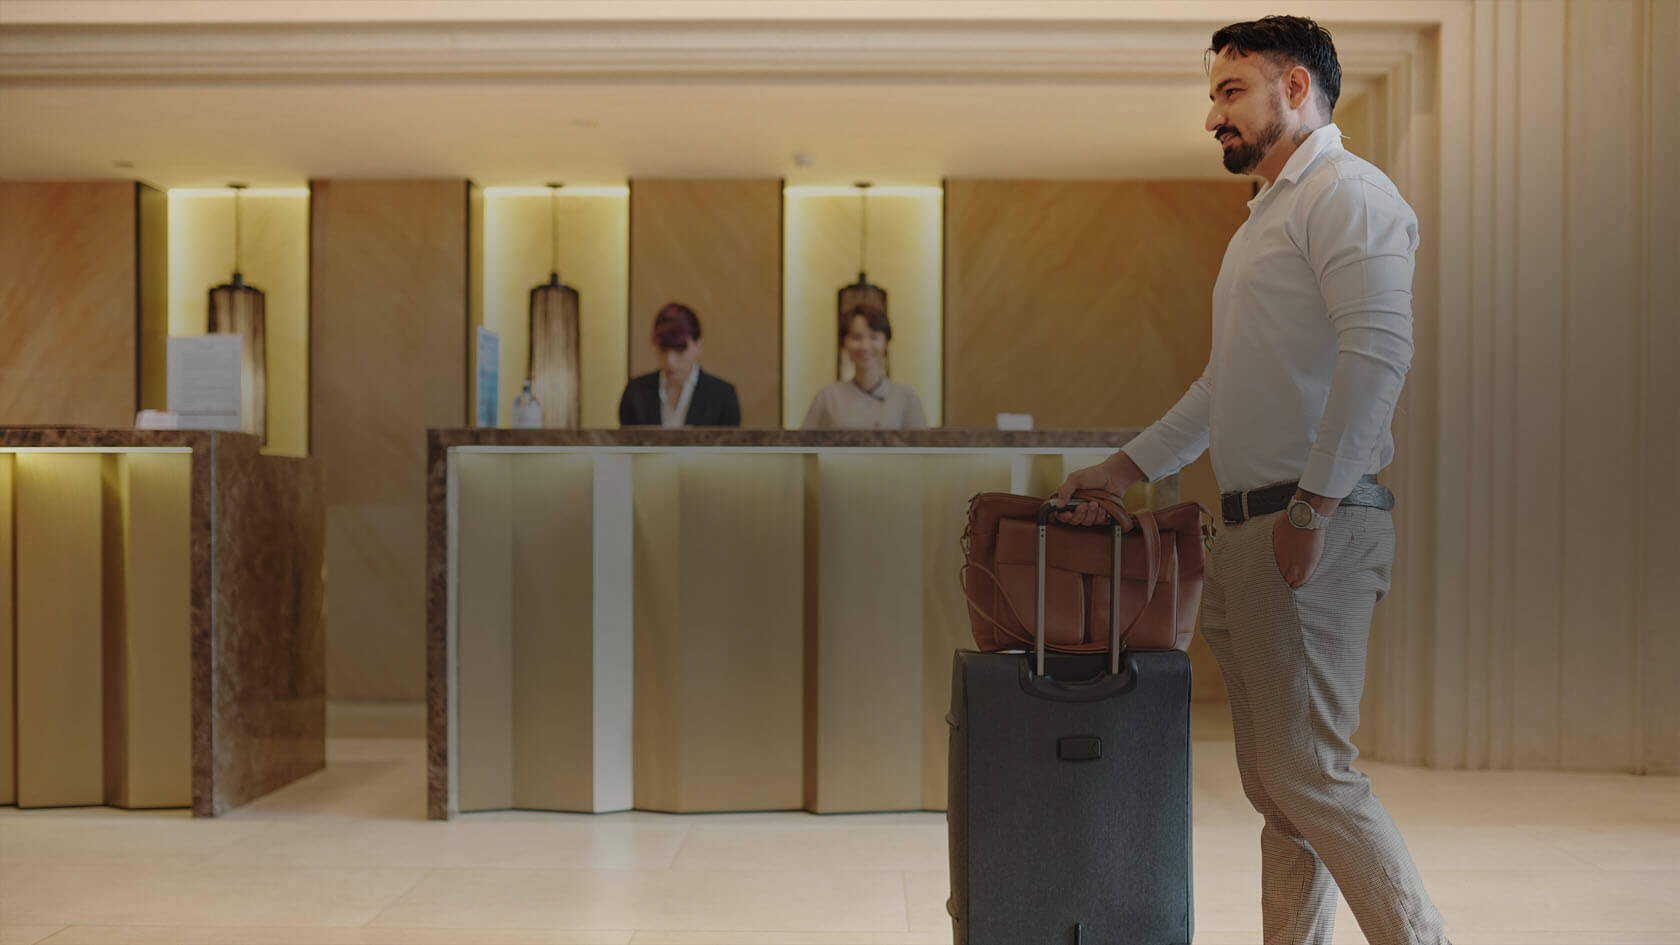 A guest arrives at a hotel equipped with a smart security system